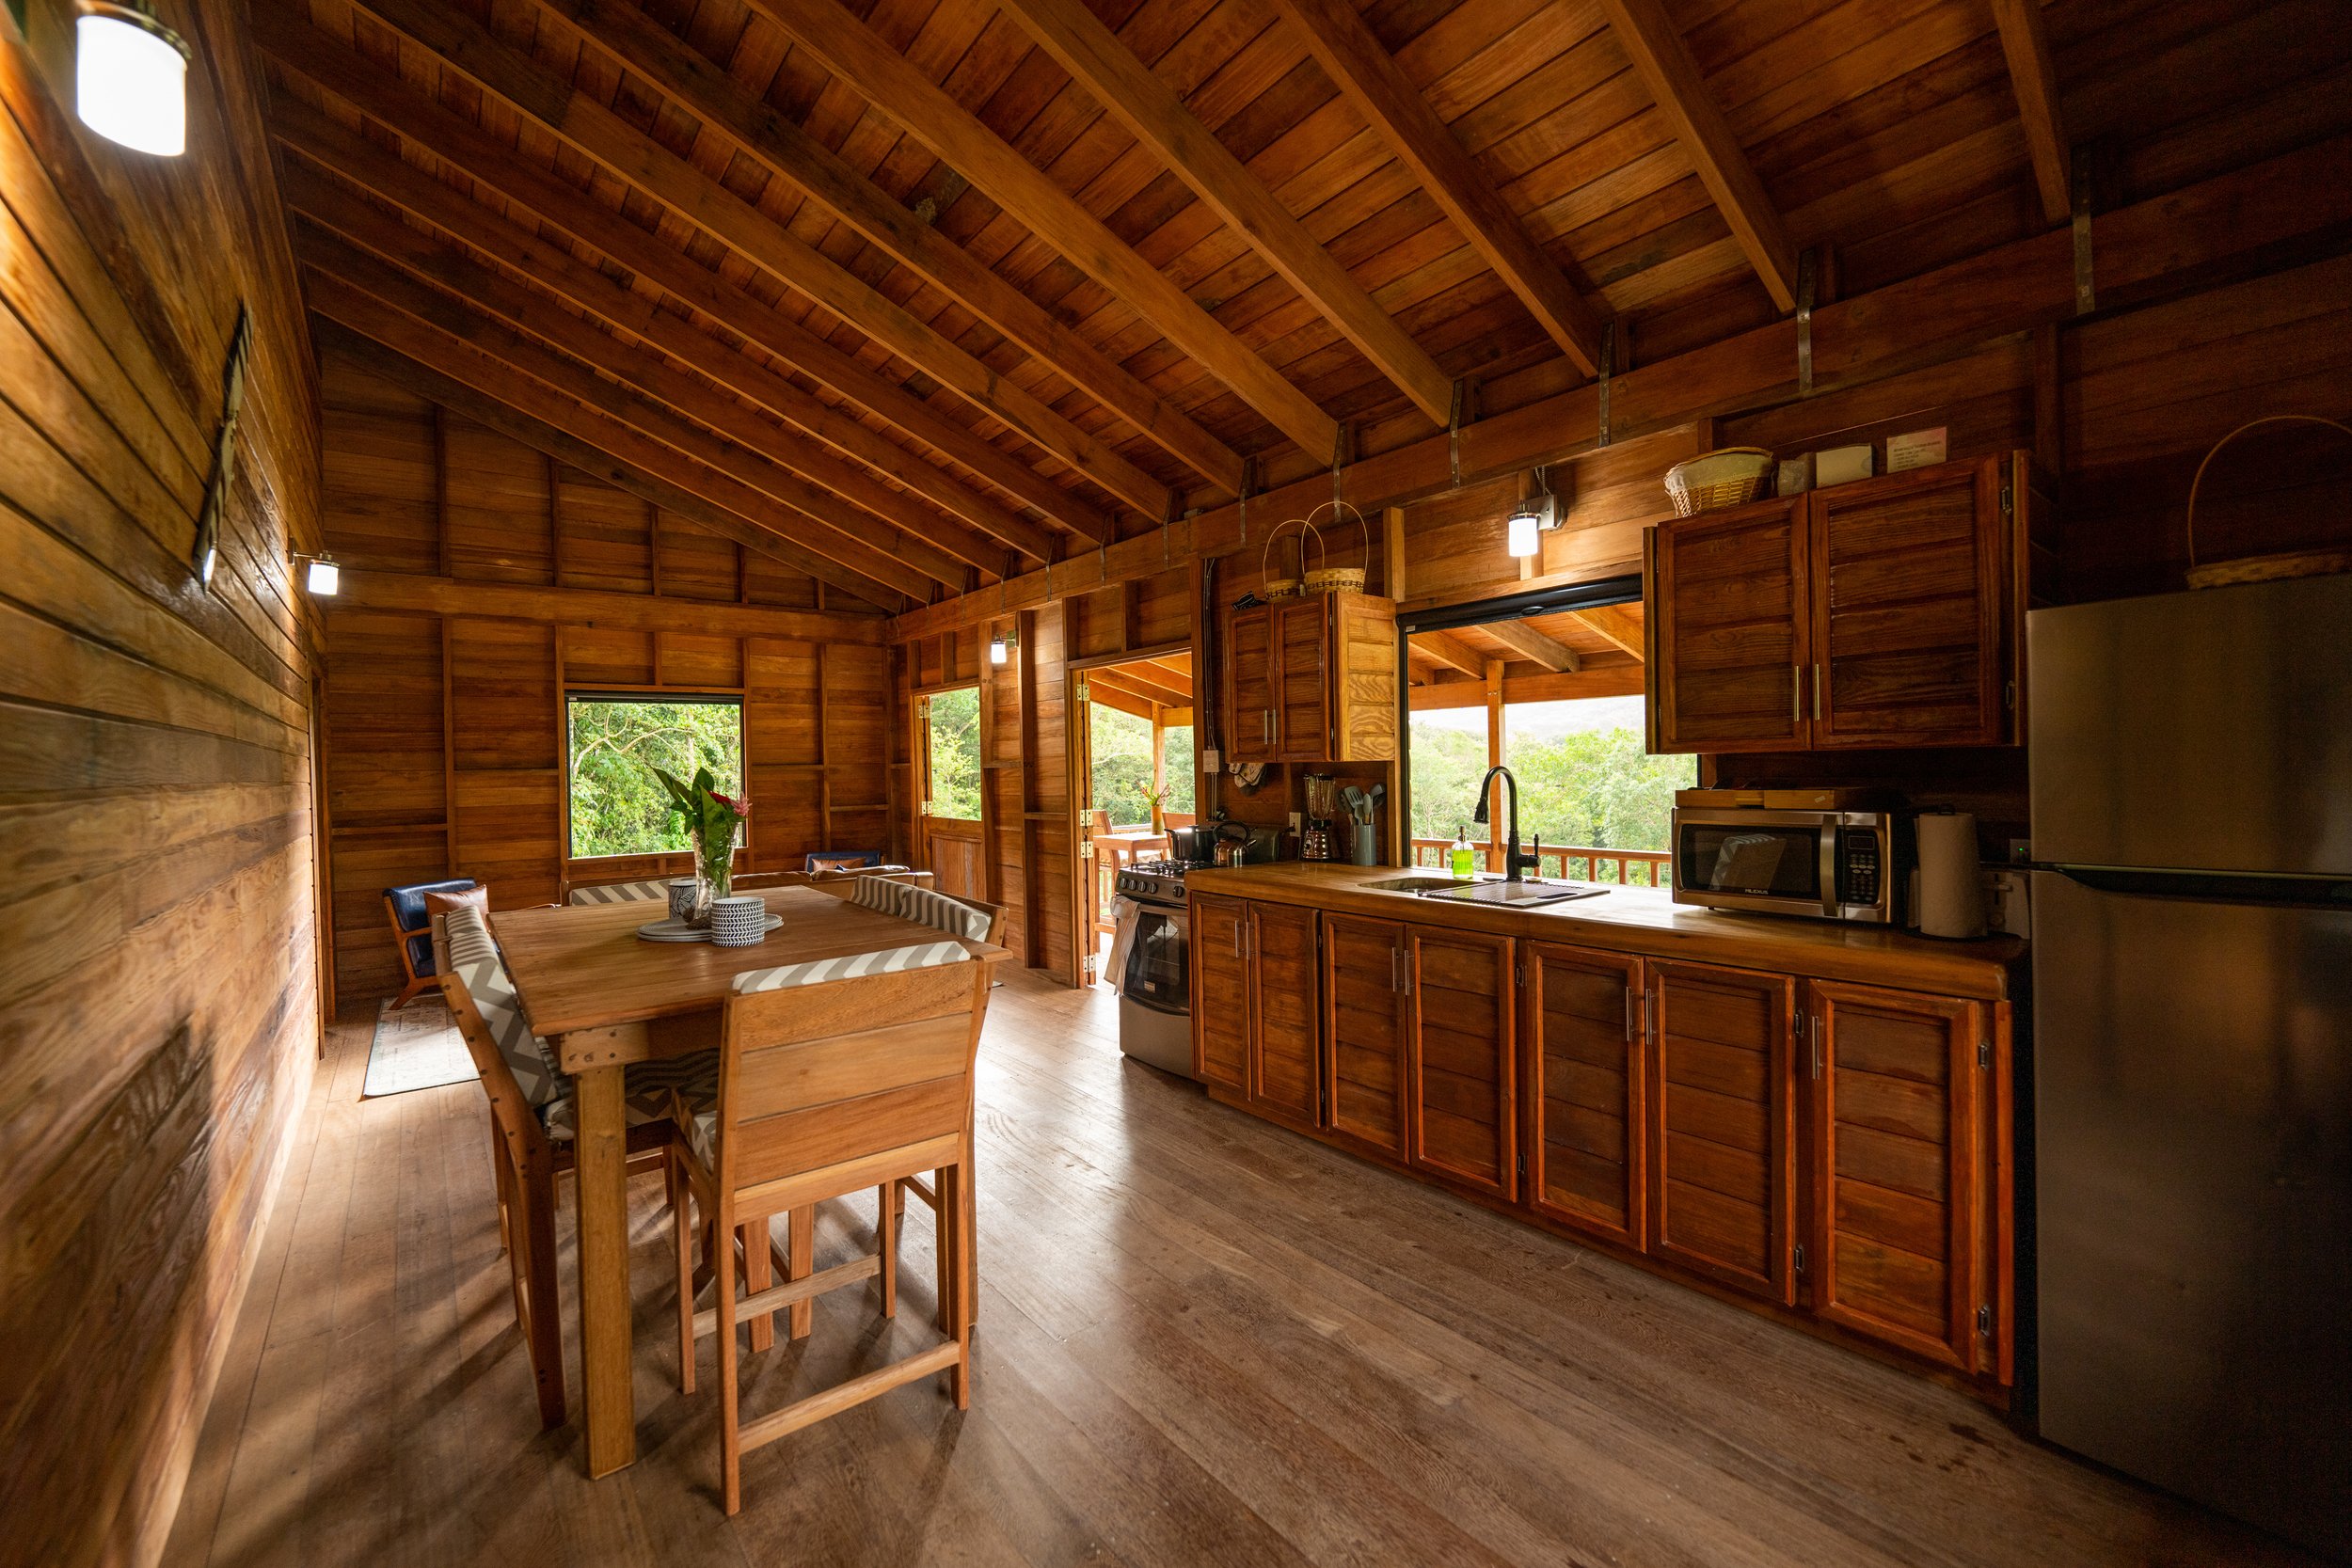 The Cabins Kitchen &amp; Dining Area